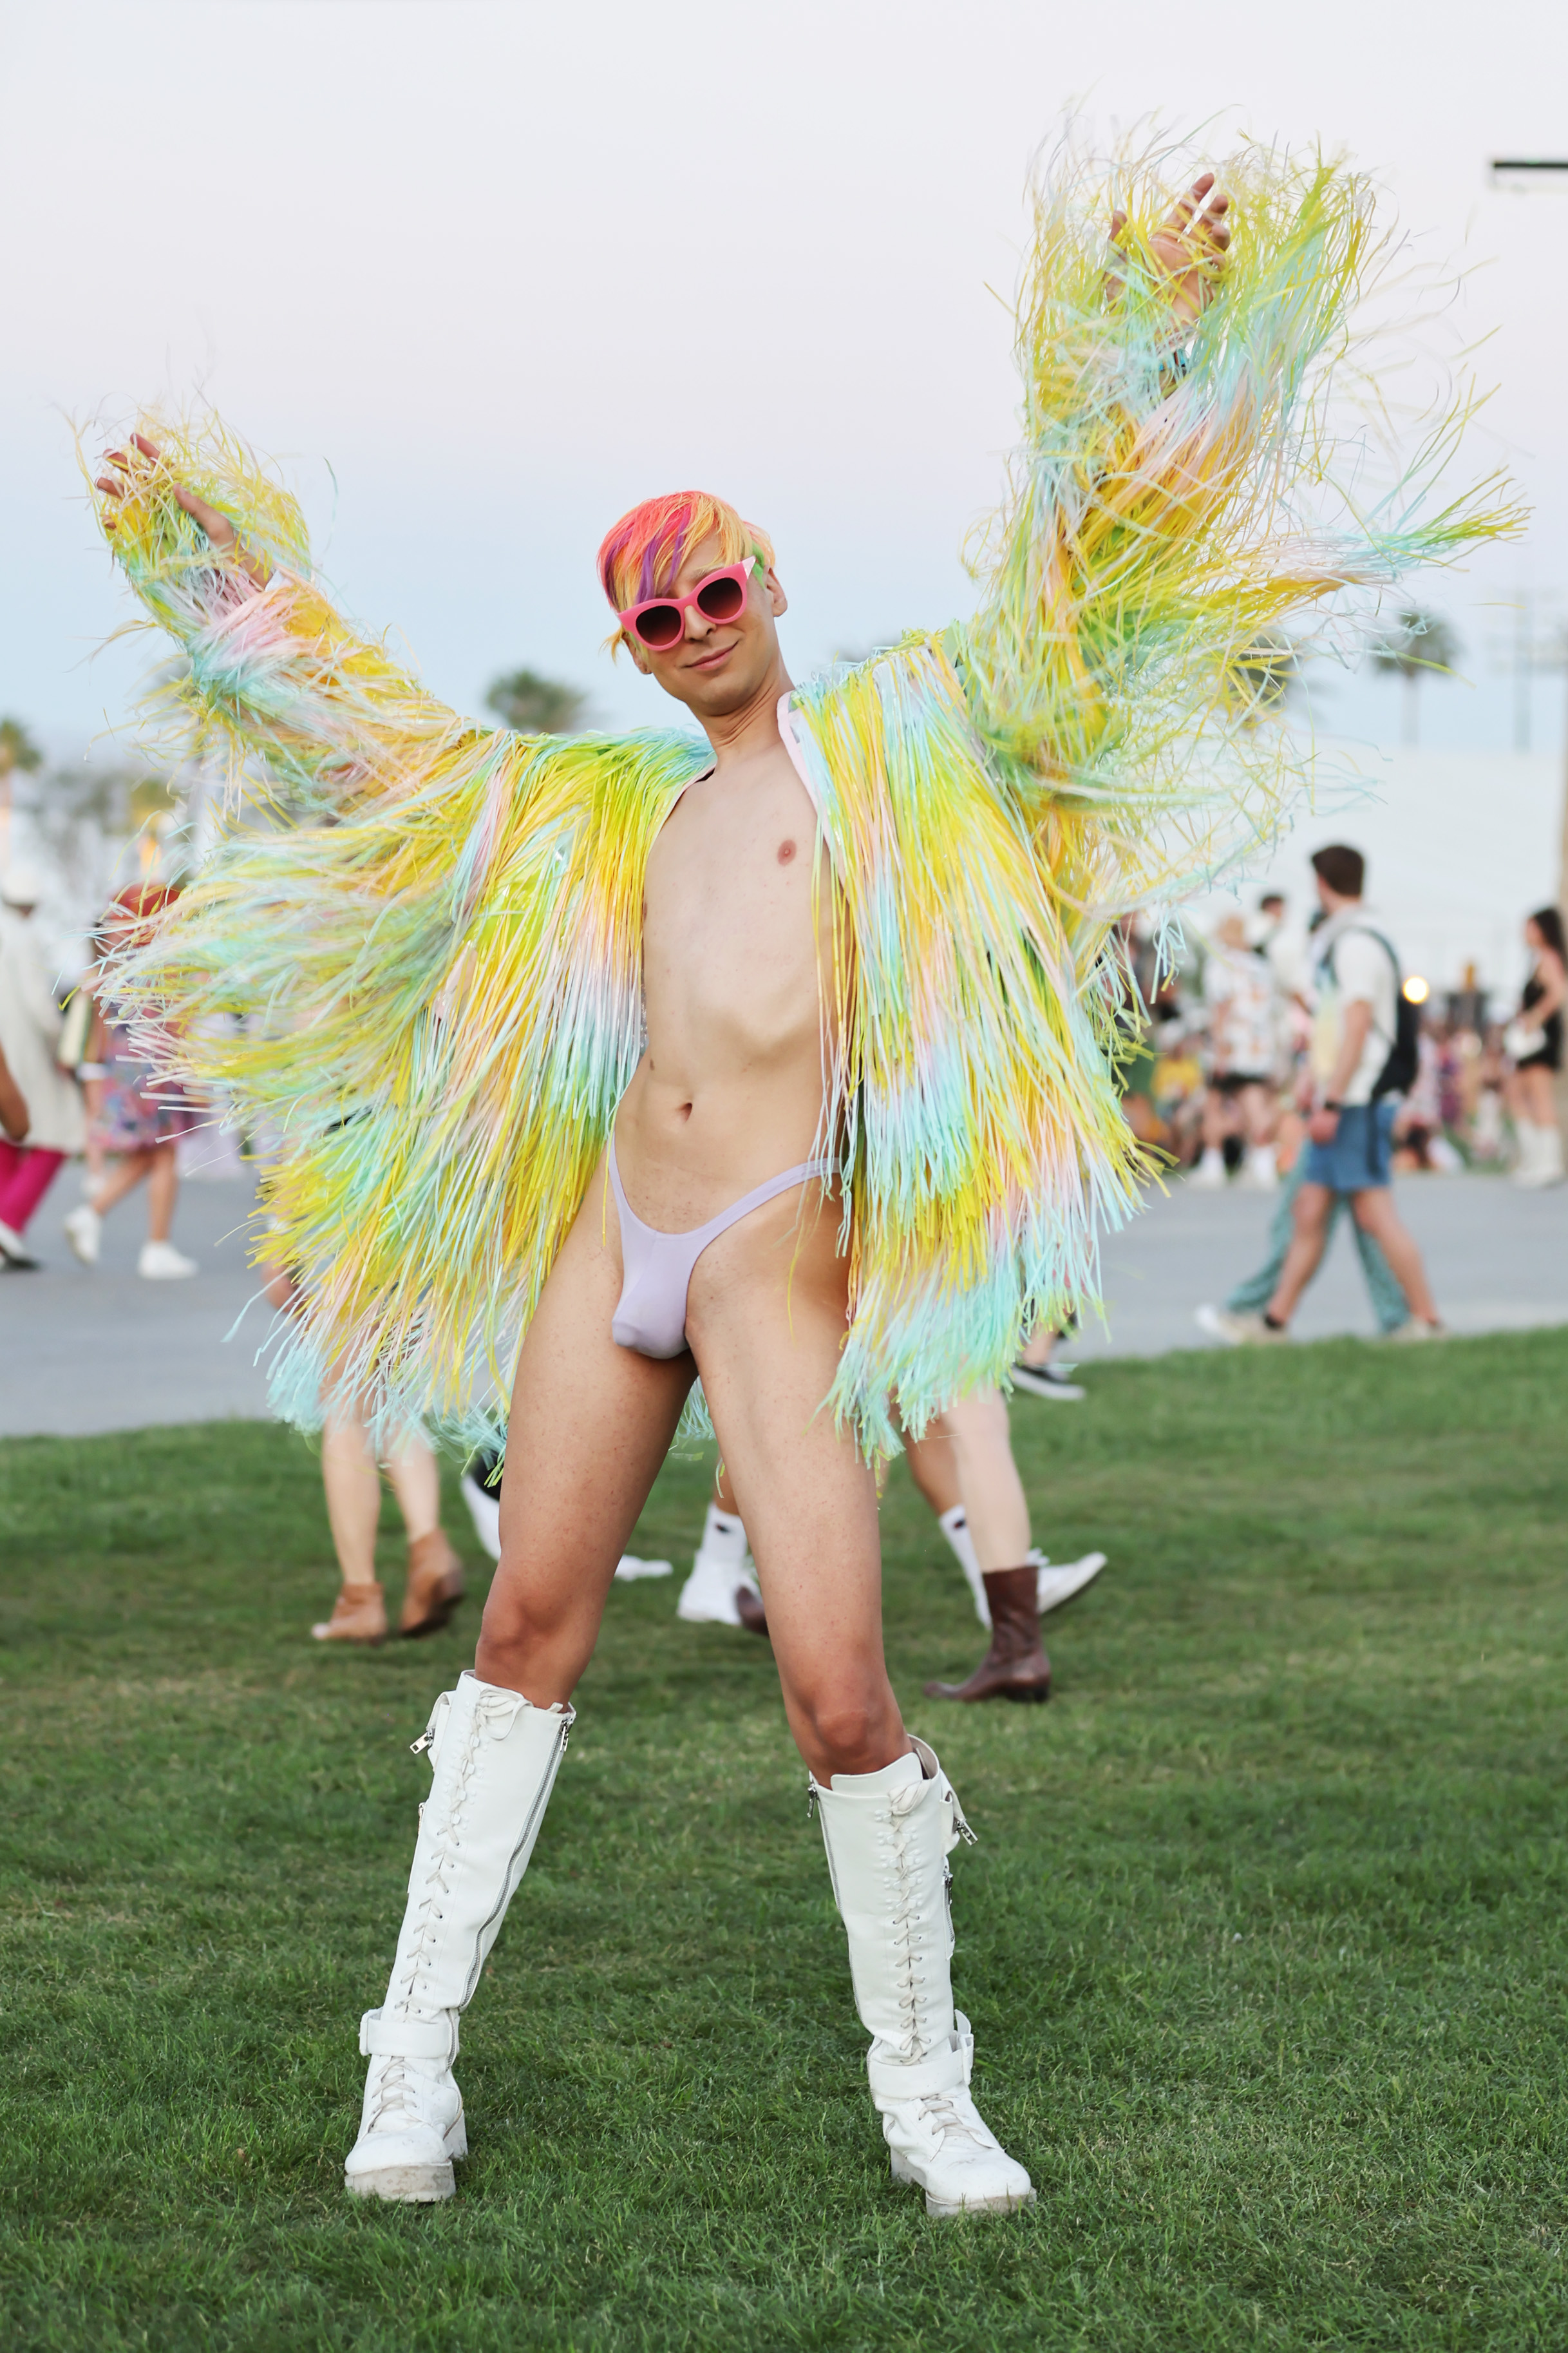 One of the attendees at the 2022 edition of the Coachella Festival (Photo by Amy Sussman/Getty Images for Coachella)